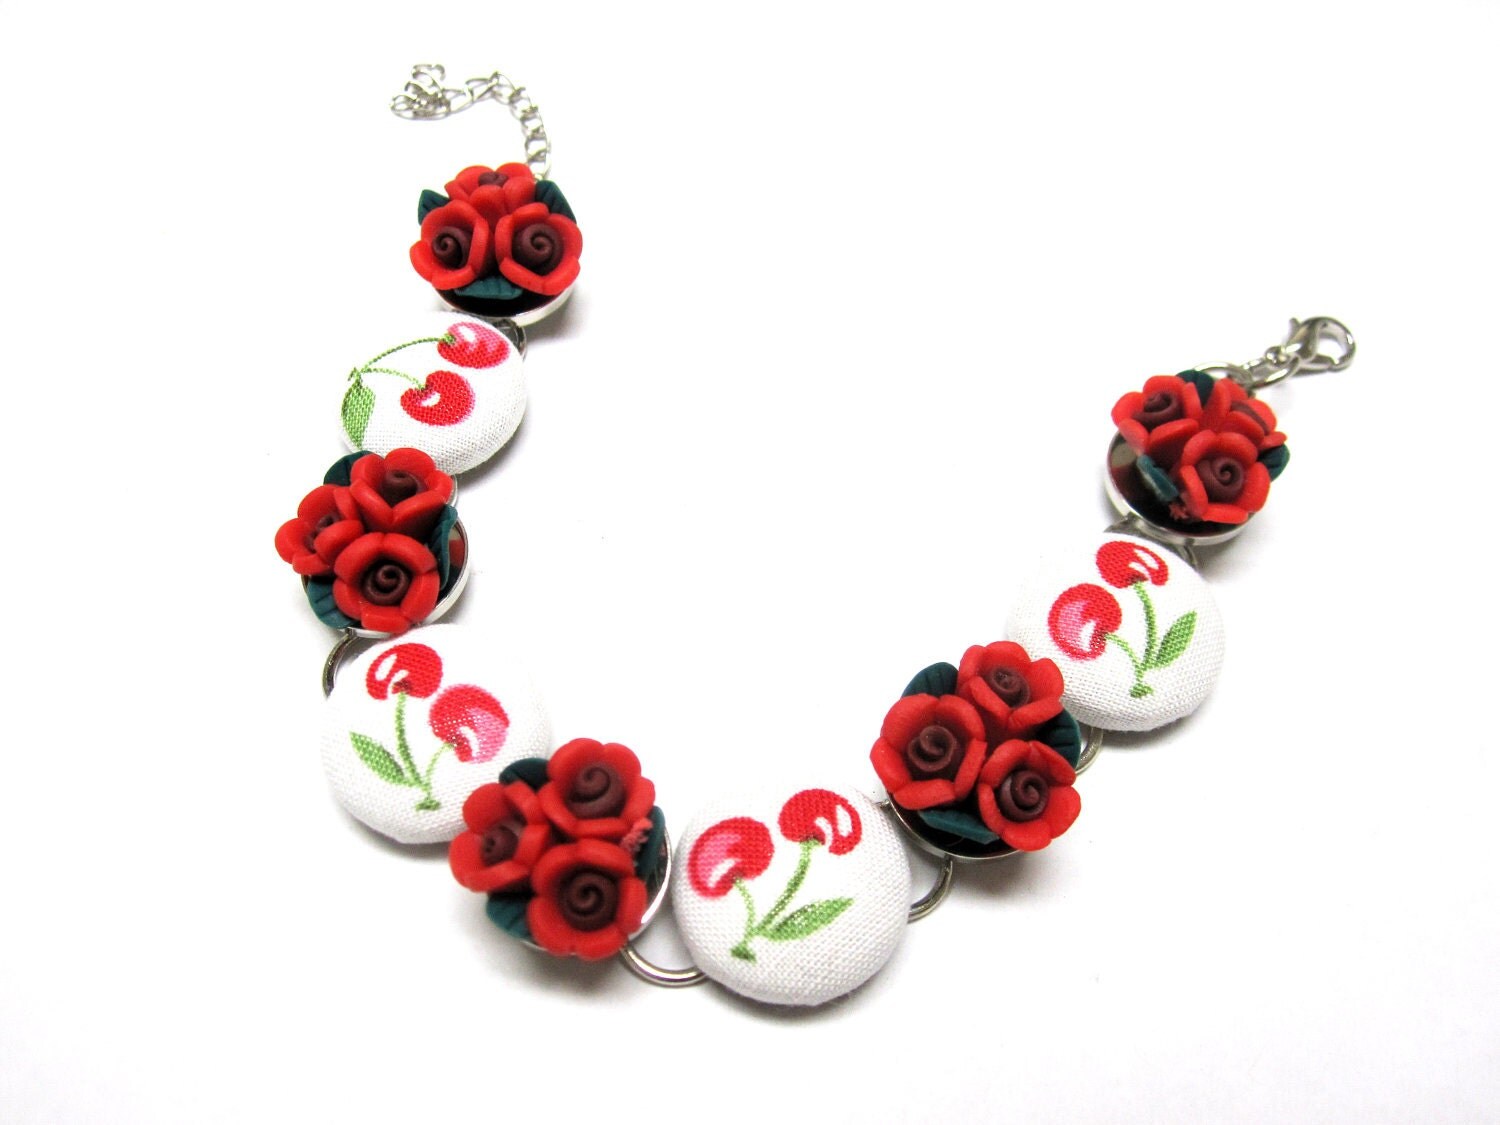 Rose and Cherry Bracelet Rockabilly Jewelry Button Cherries